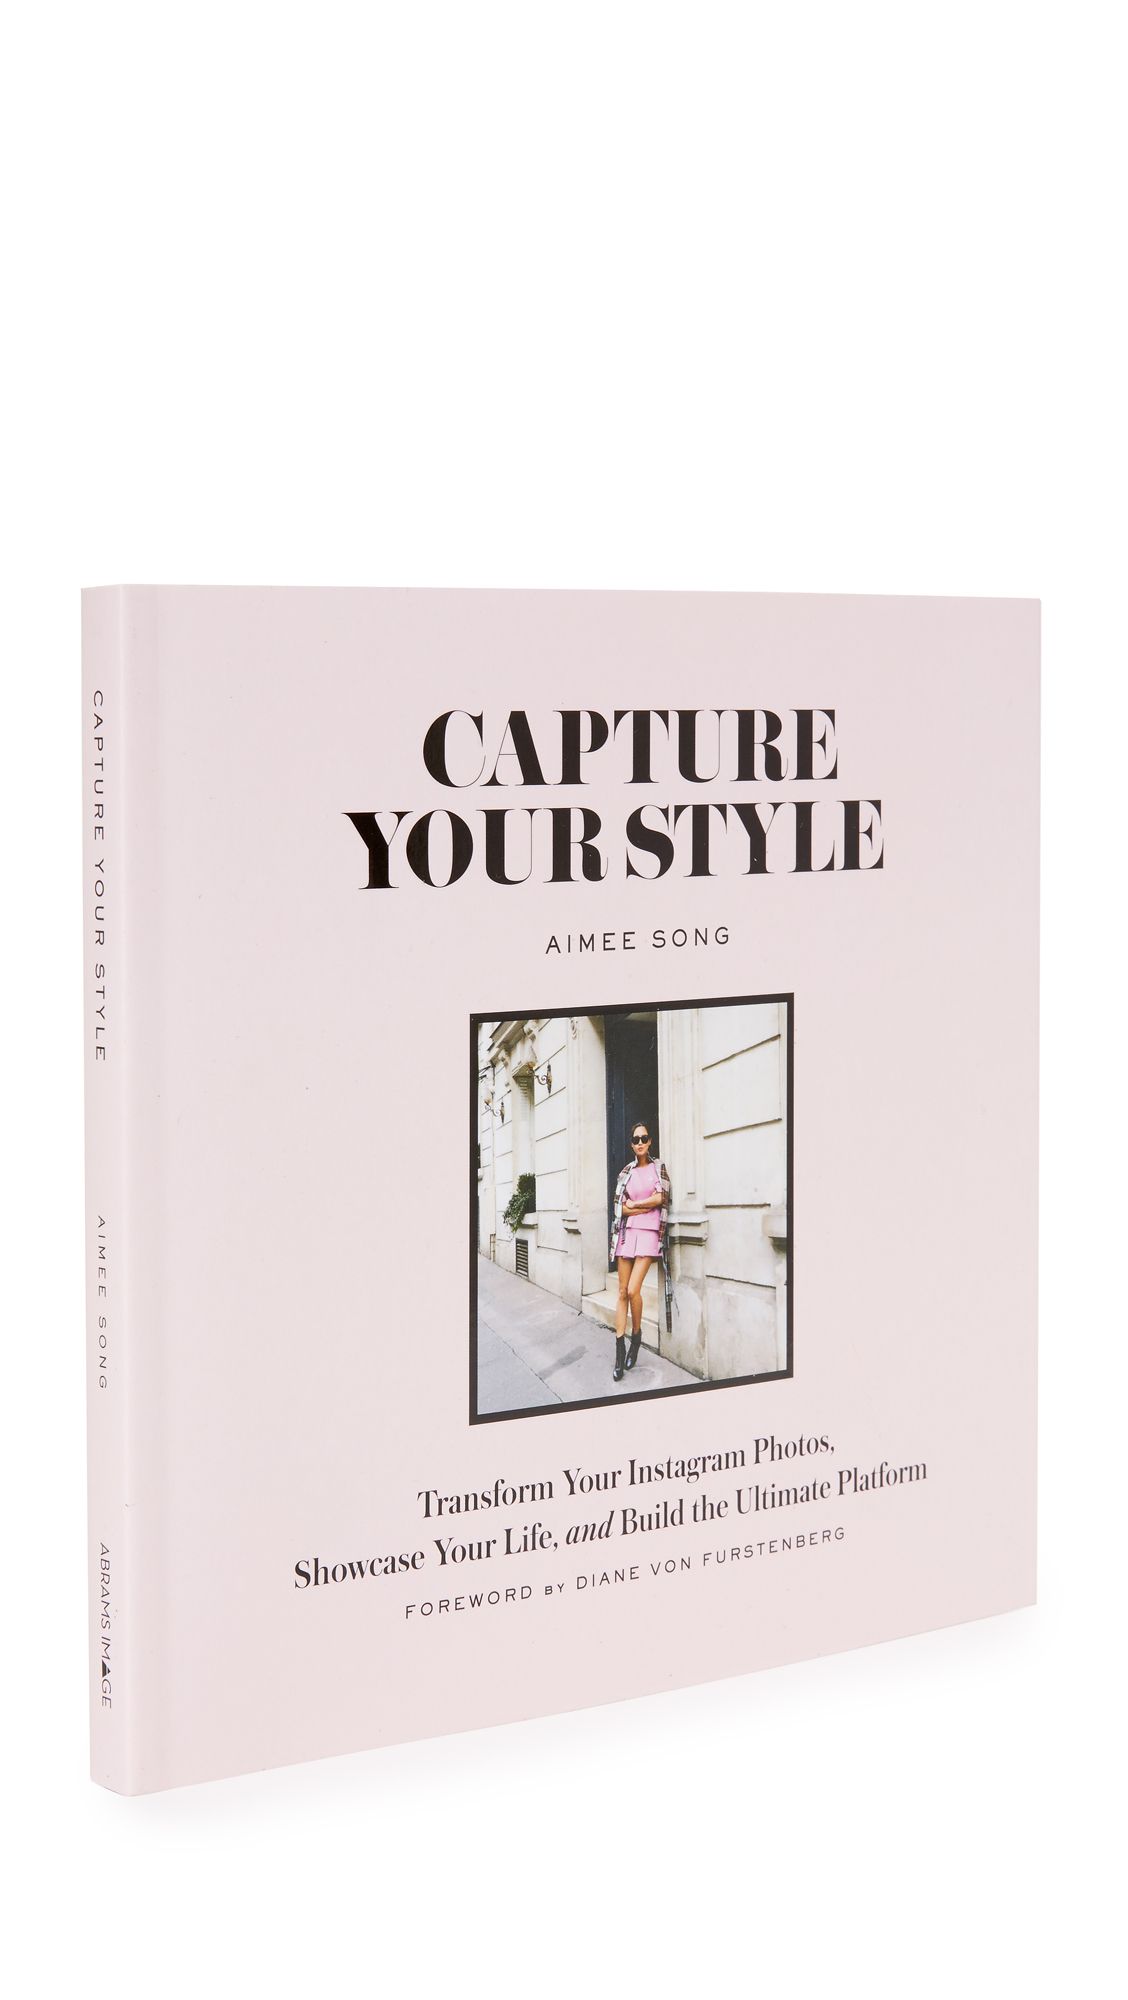 Books with Style Capture Your Style: Aimee Song | Shopbop